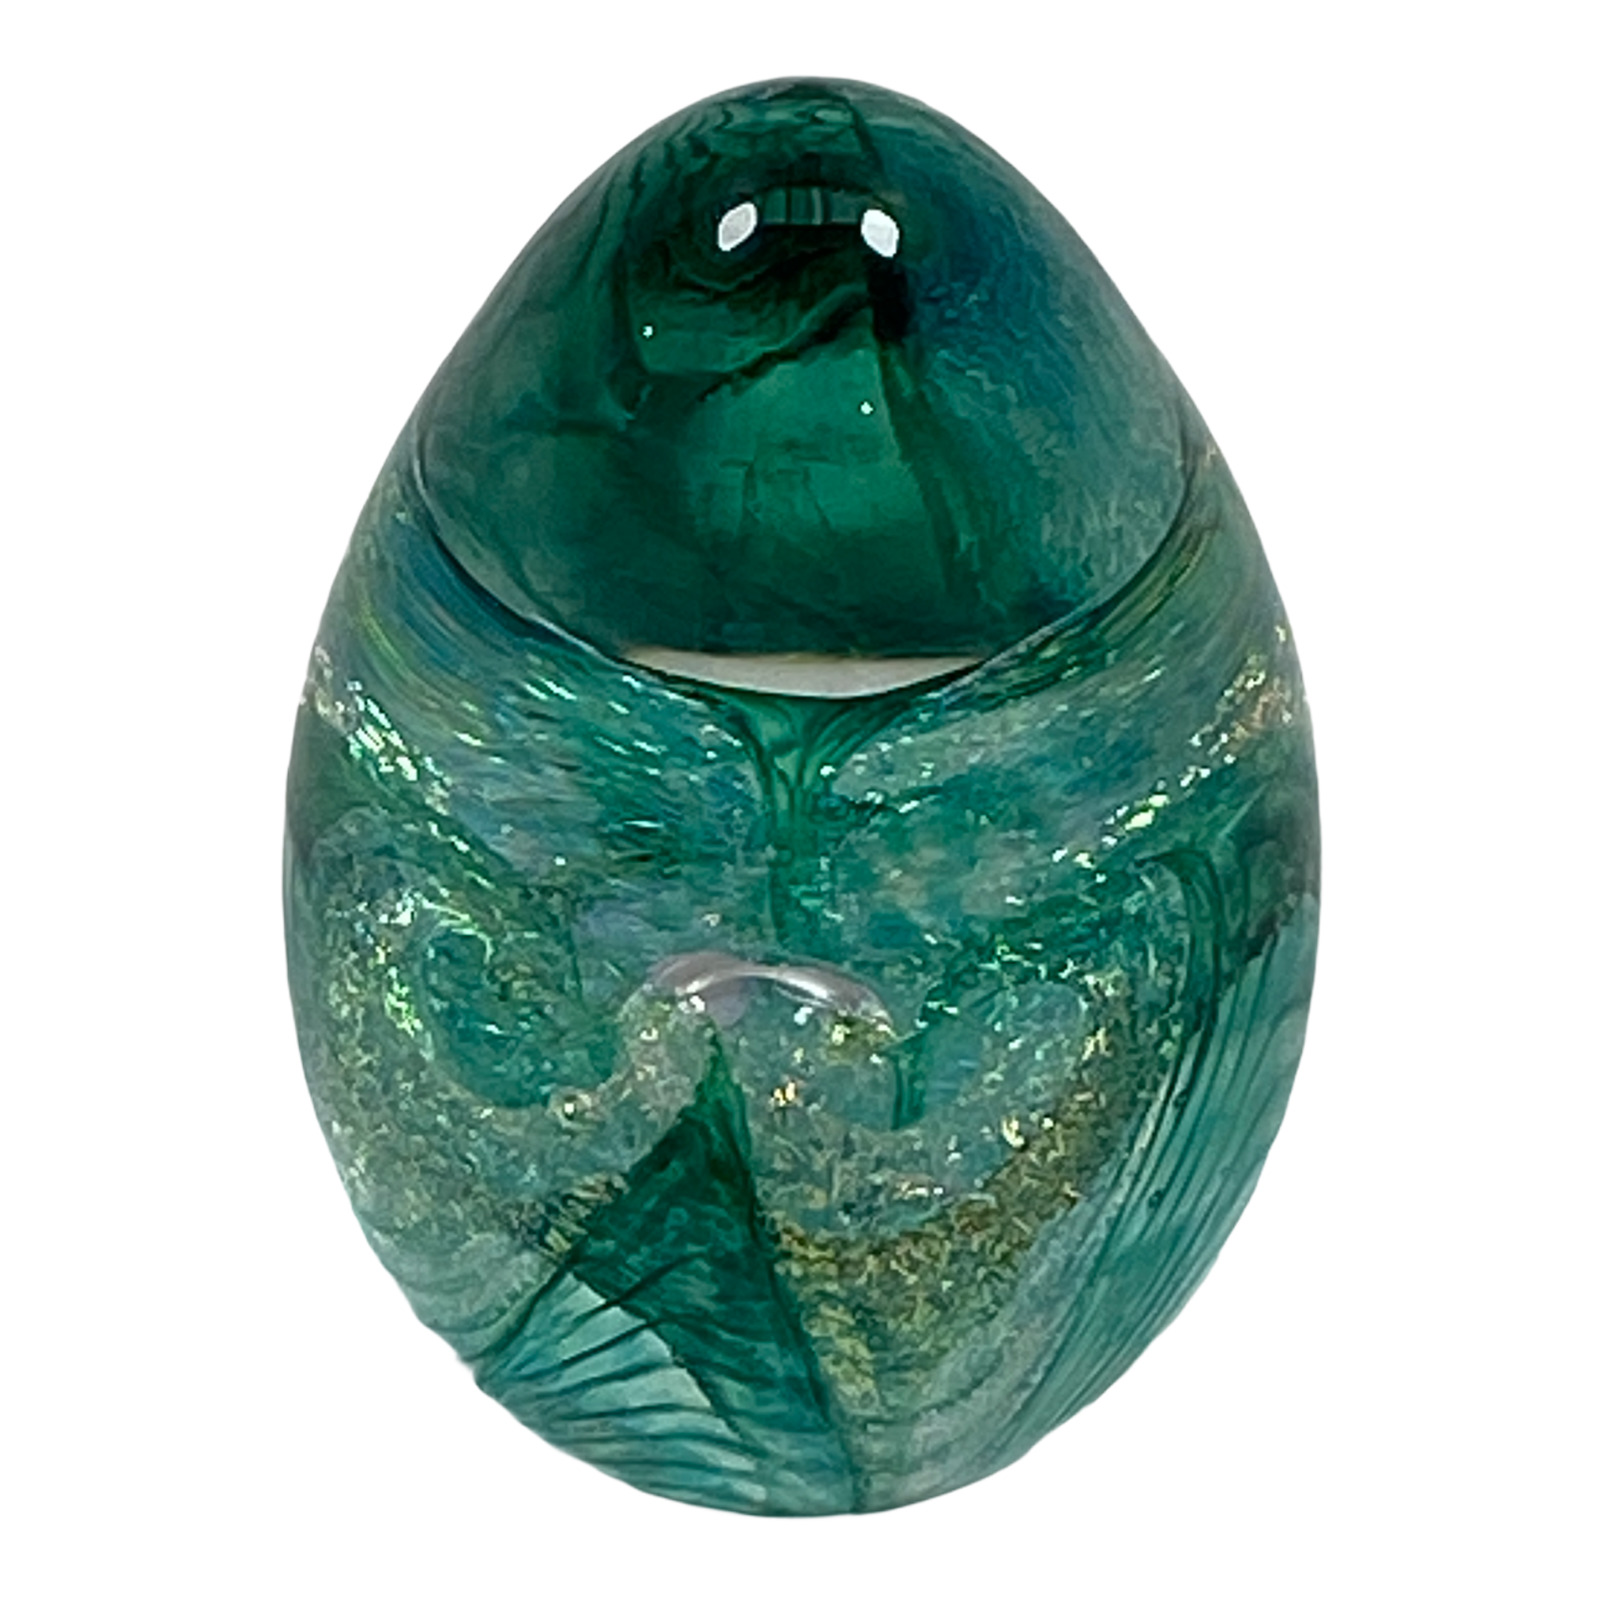 Vintage Glass Egg by GES For Display Colored Design Attributed To Canthenis